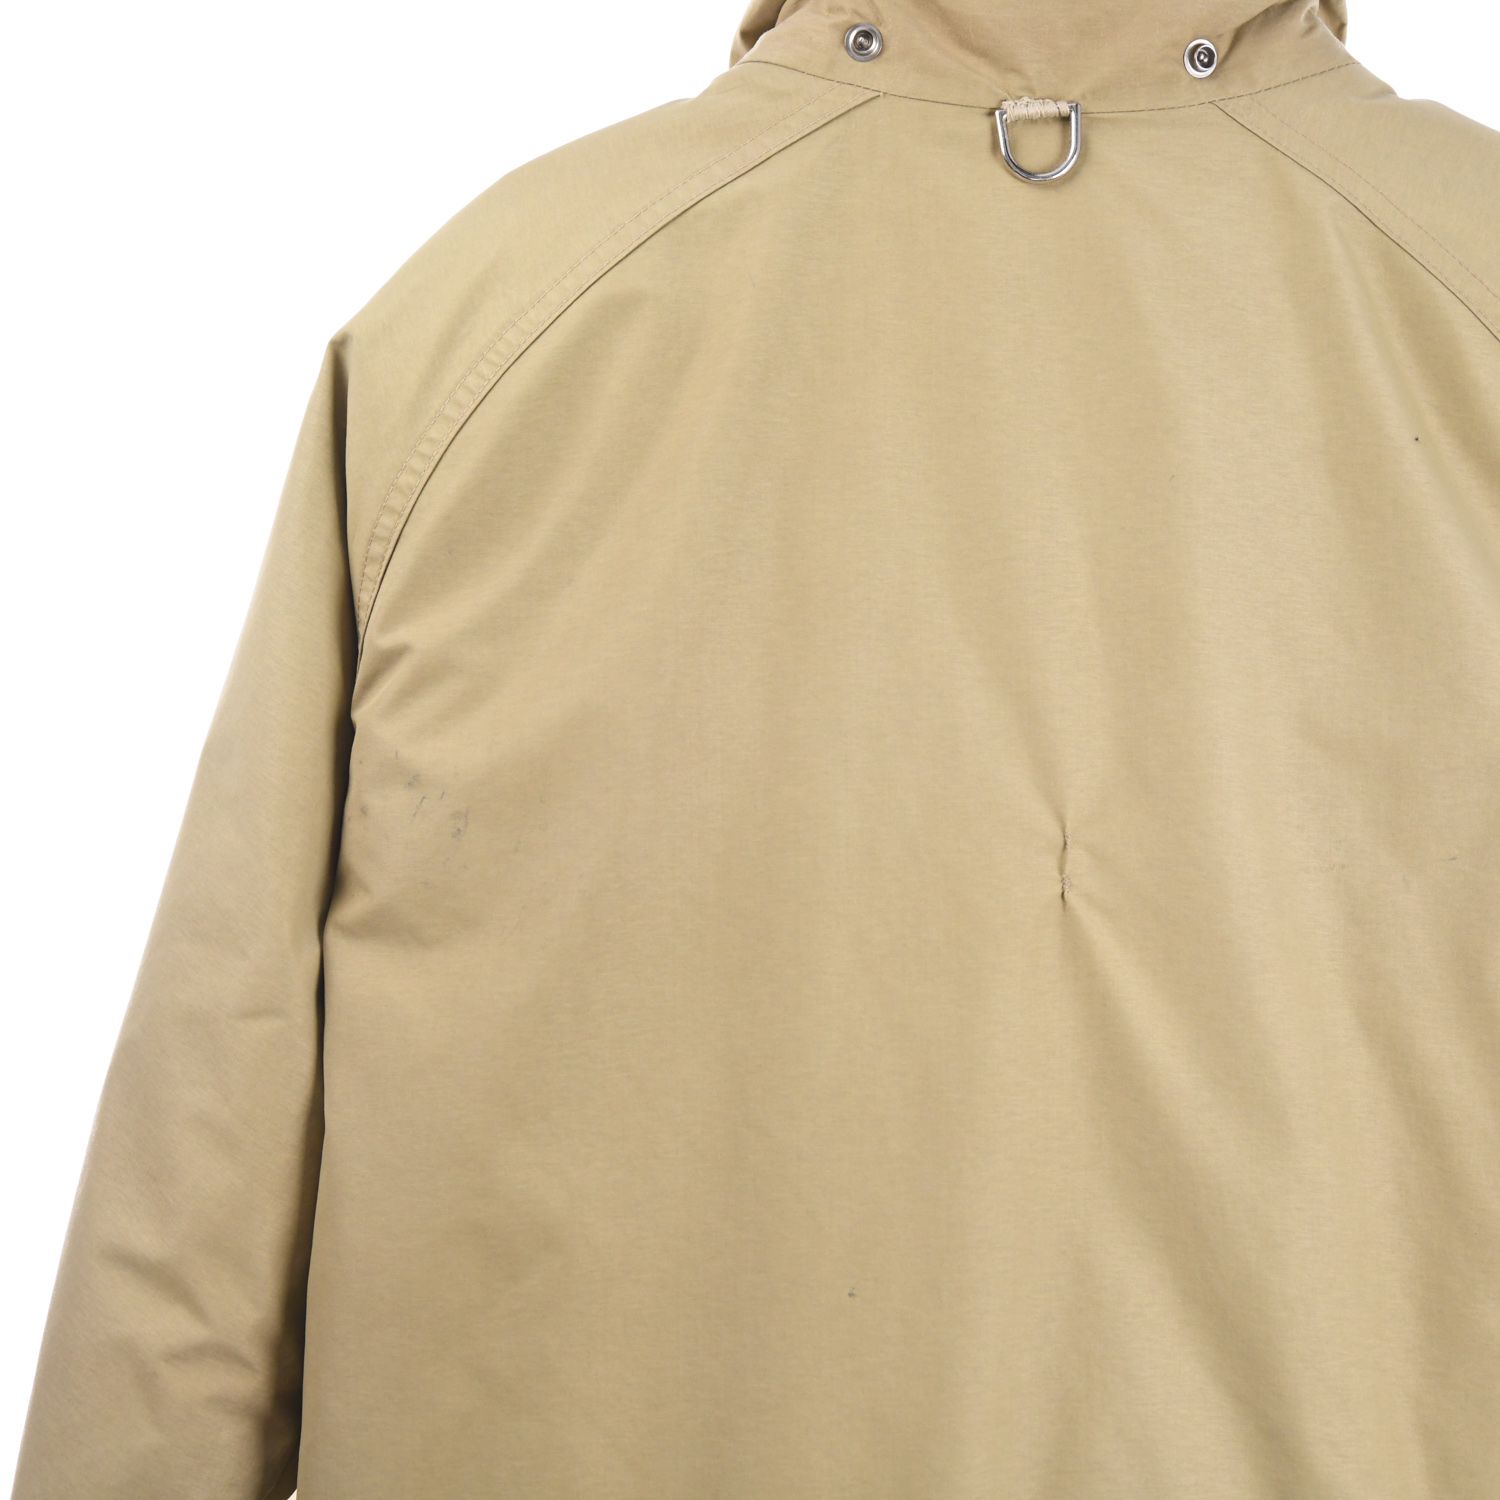 The North Face Late 1970s Gore-Tex Classic Design Jacket